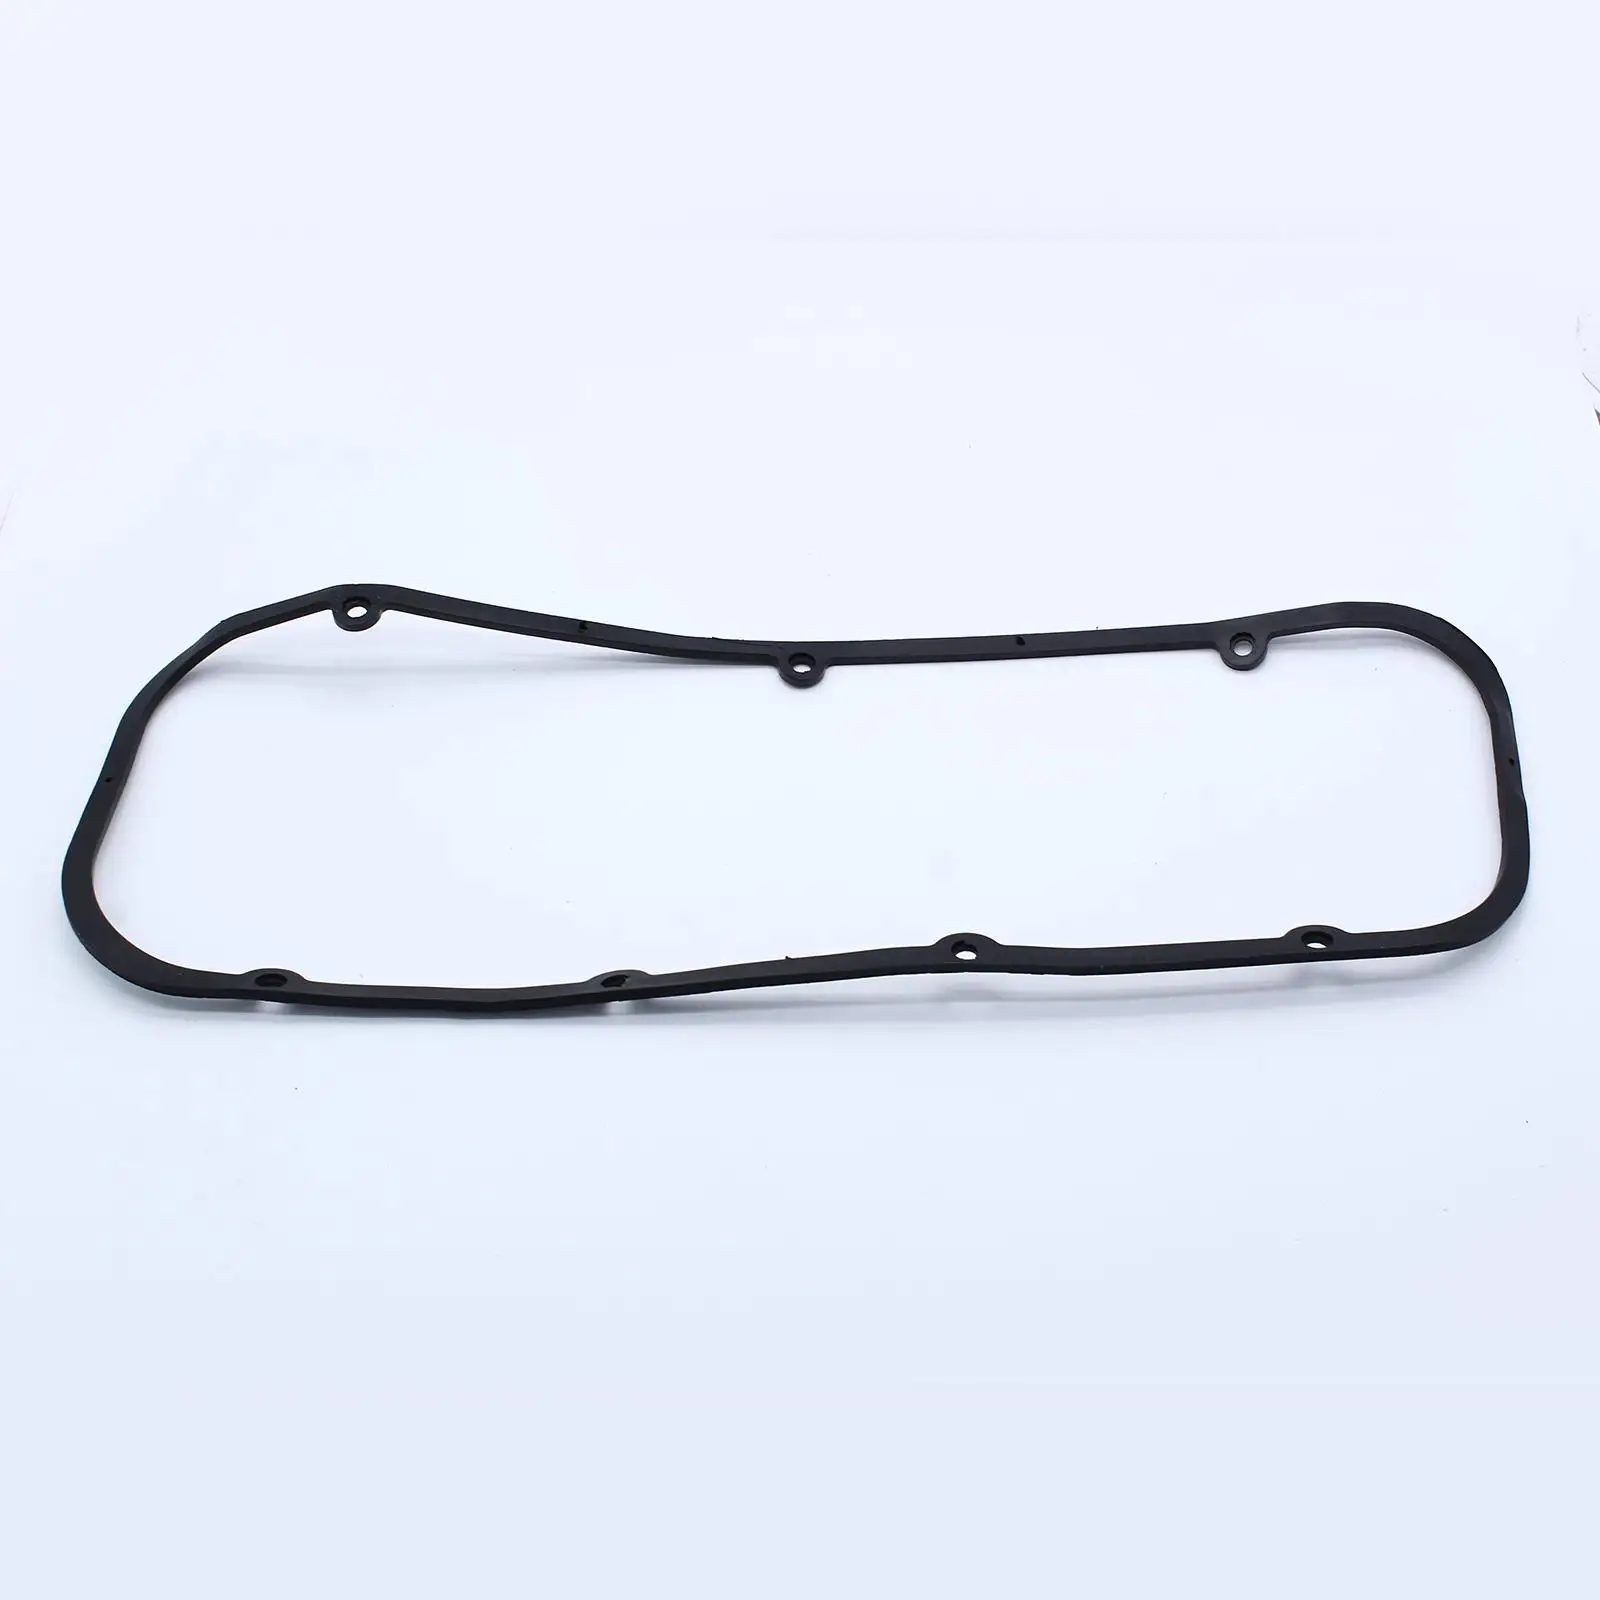 Valve Cover Gaskets Gaskets Seals Fits for Chevy BB 396 427 454 472 502